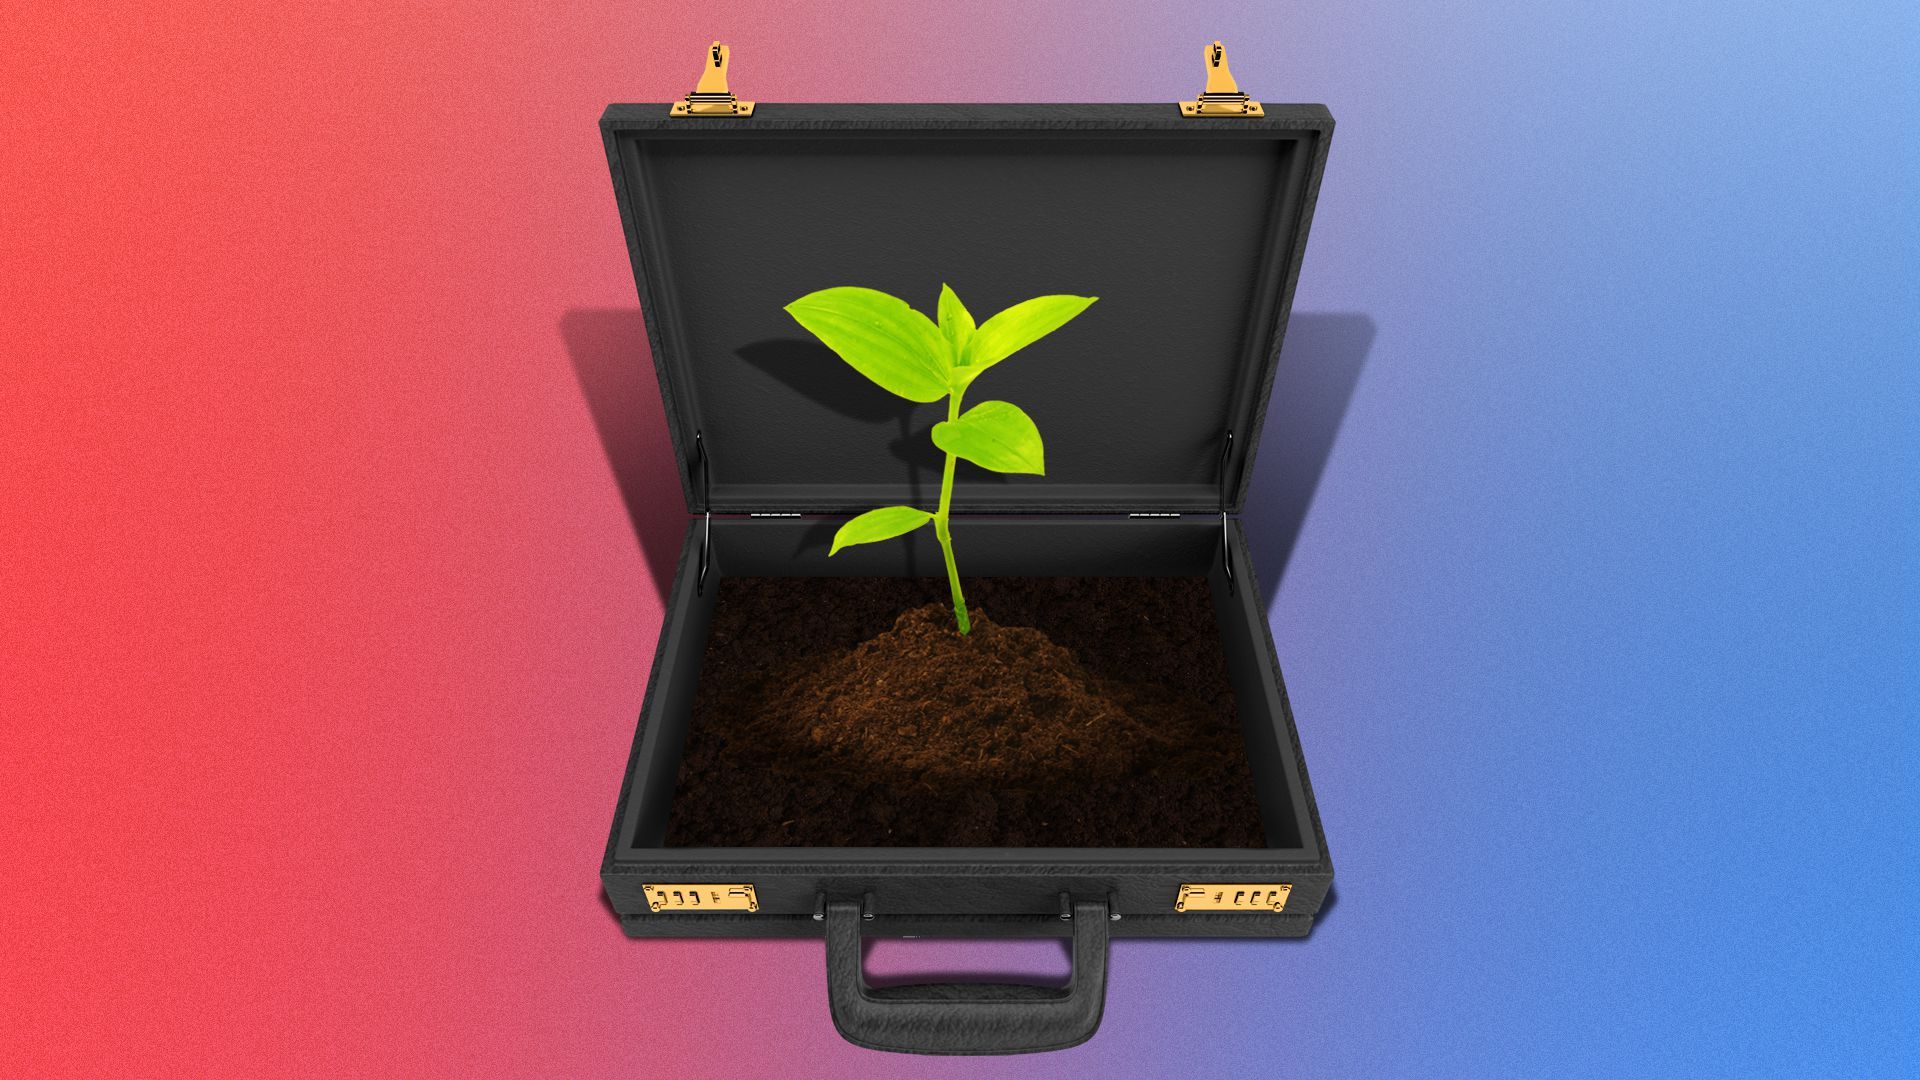 Illustration of an open briefcase with a small plant growing out of it